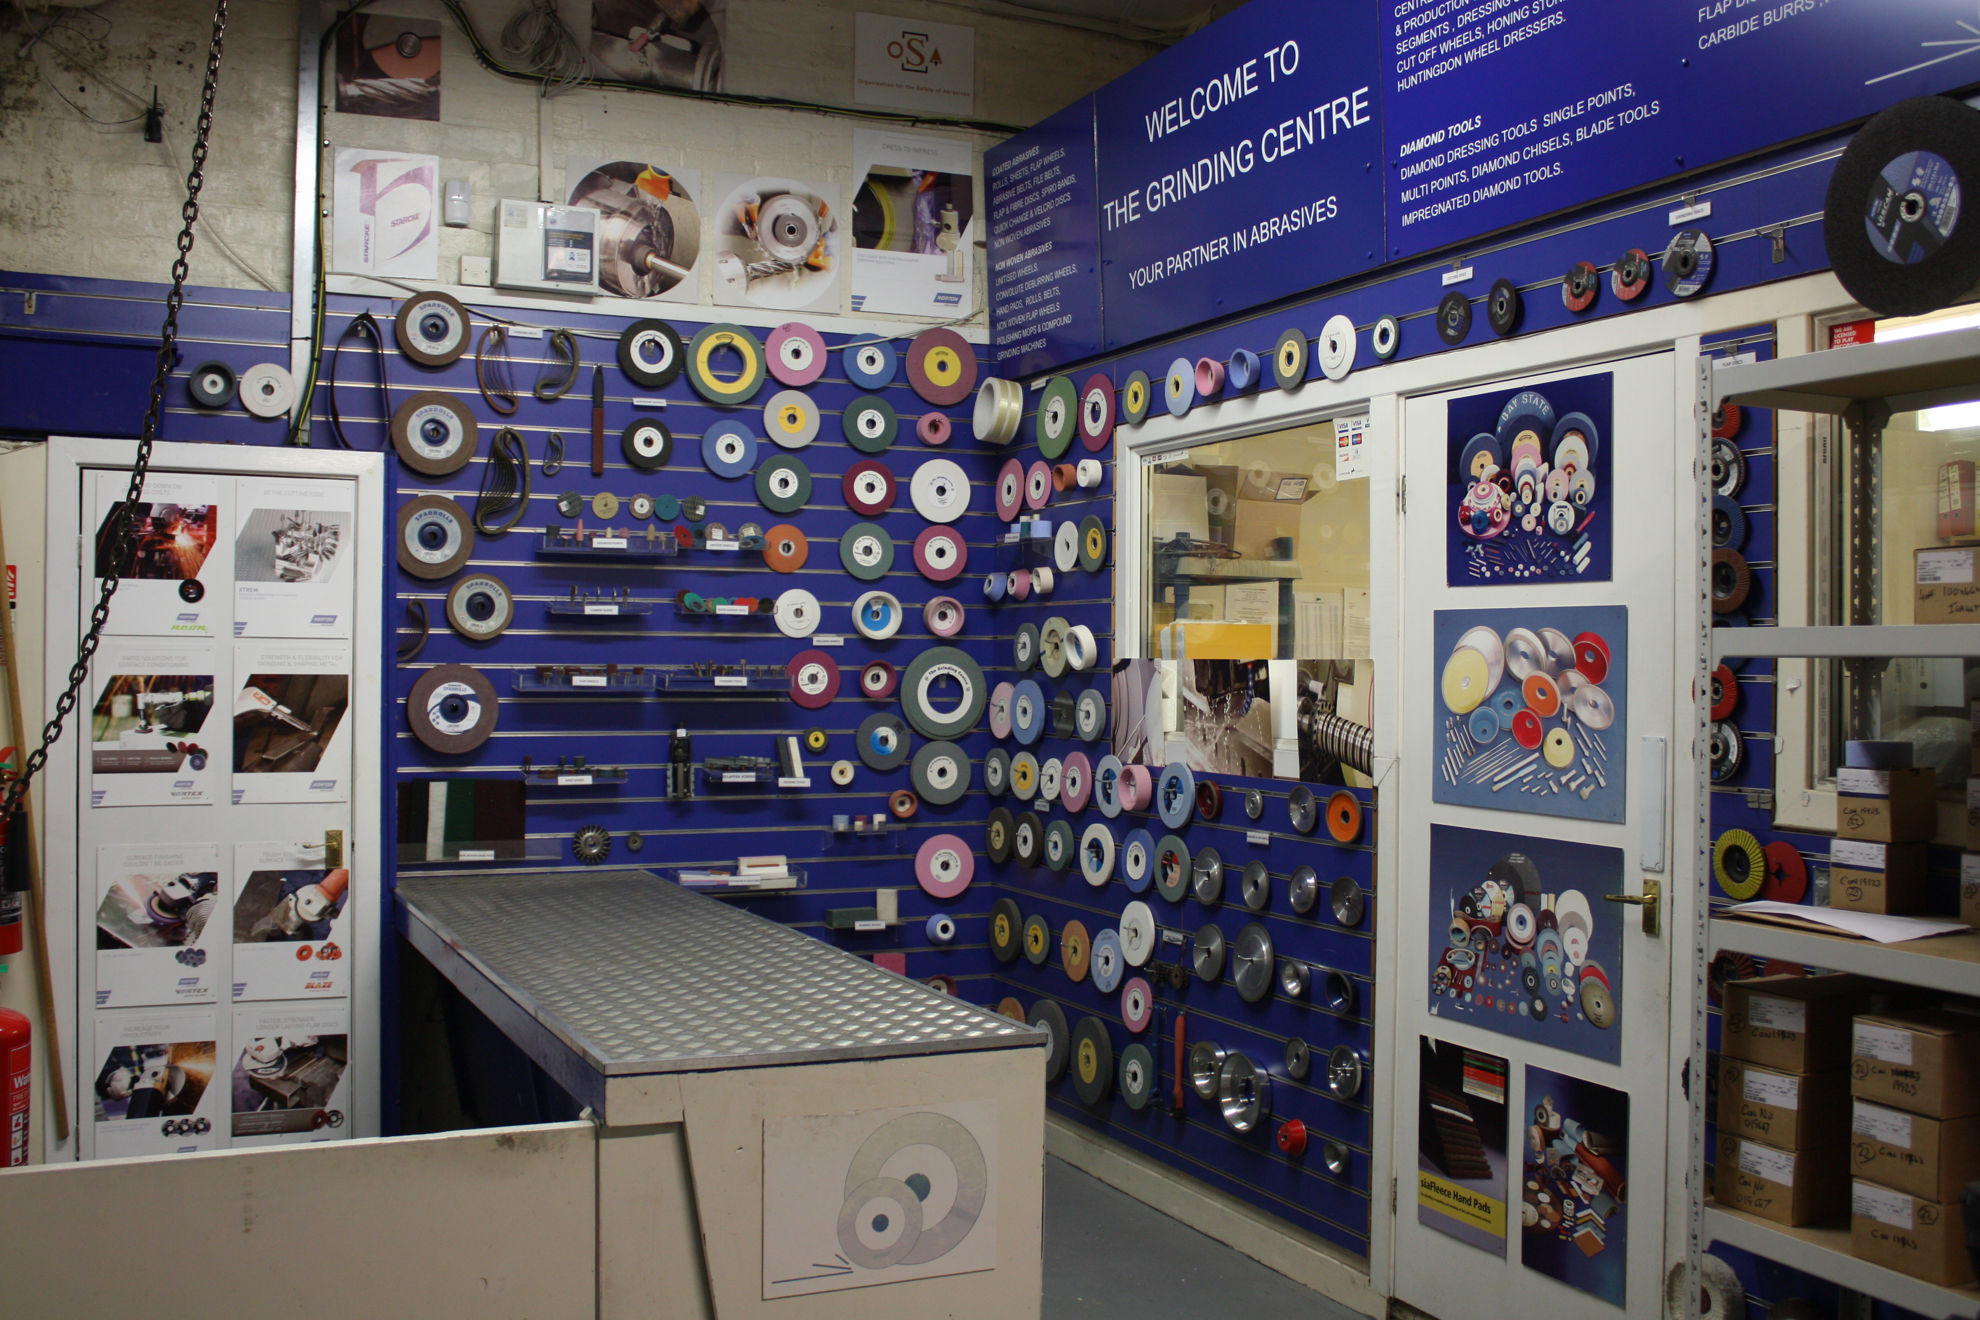 banner The Grinding Centre suppliers of grinding wheels since 1968 1